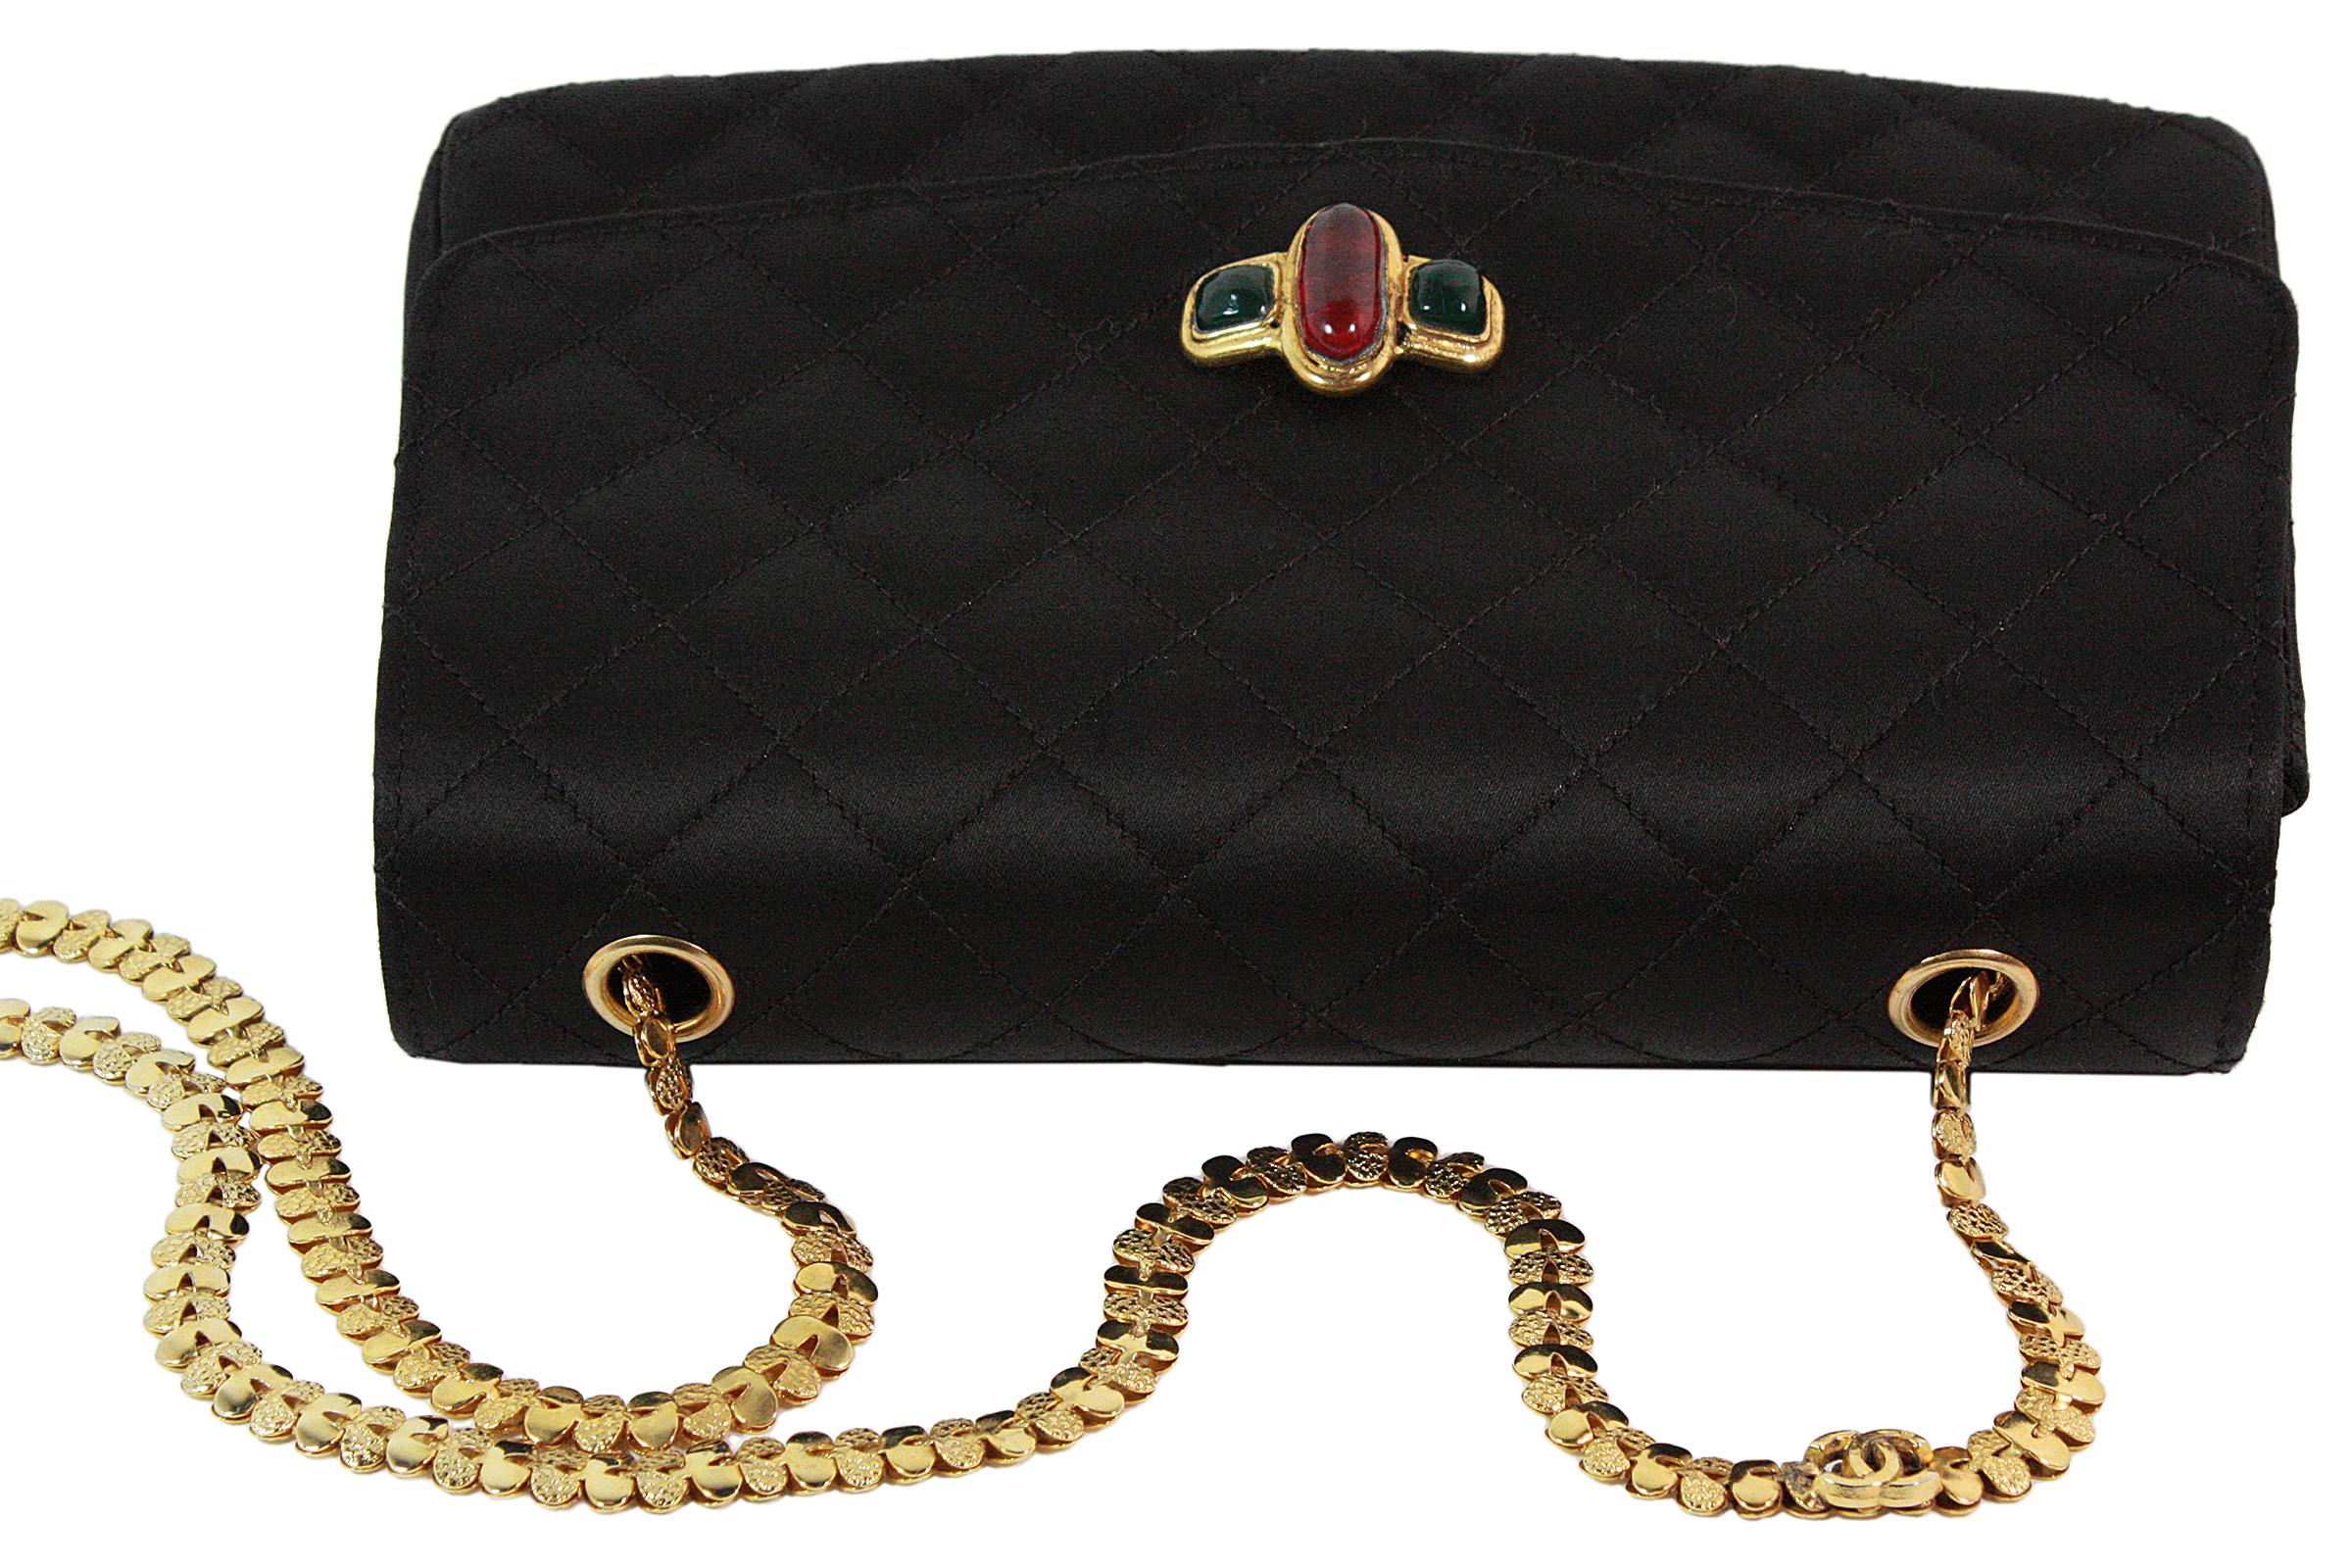 Chanel Black Satin Quilted Crossbody Bag with a Red and Green Gripoix Jewel 3